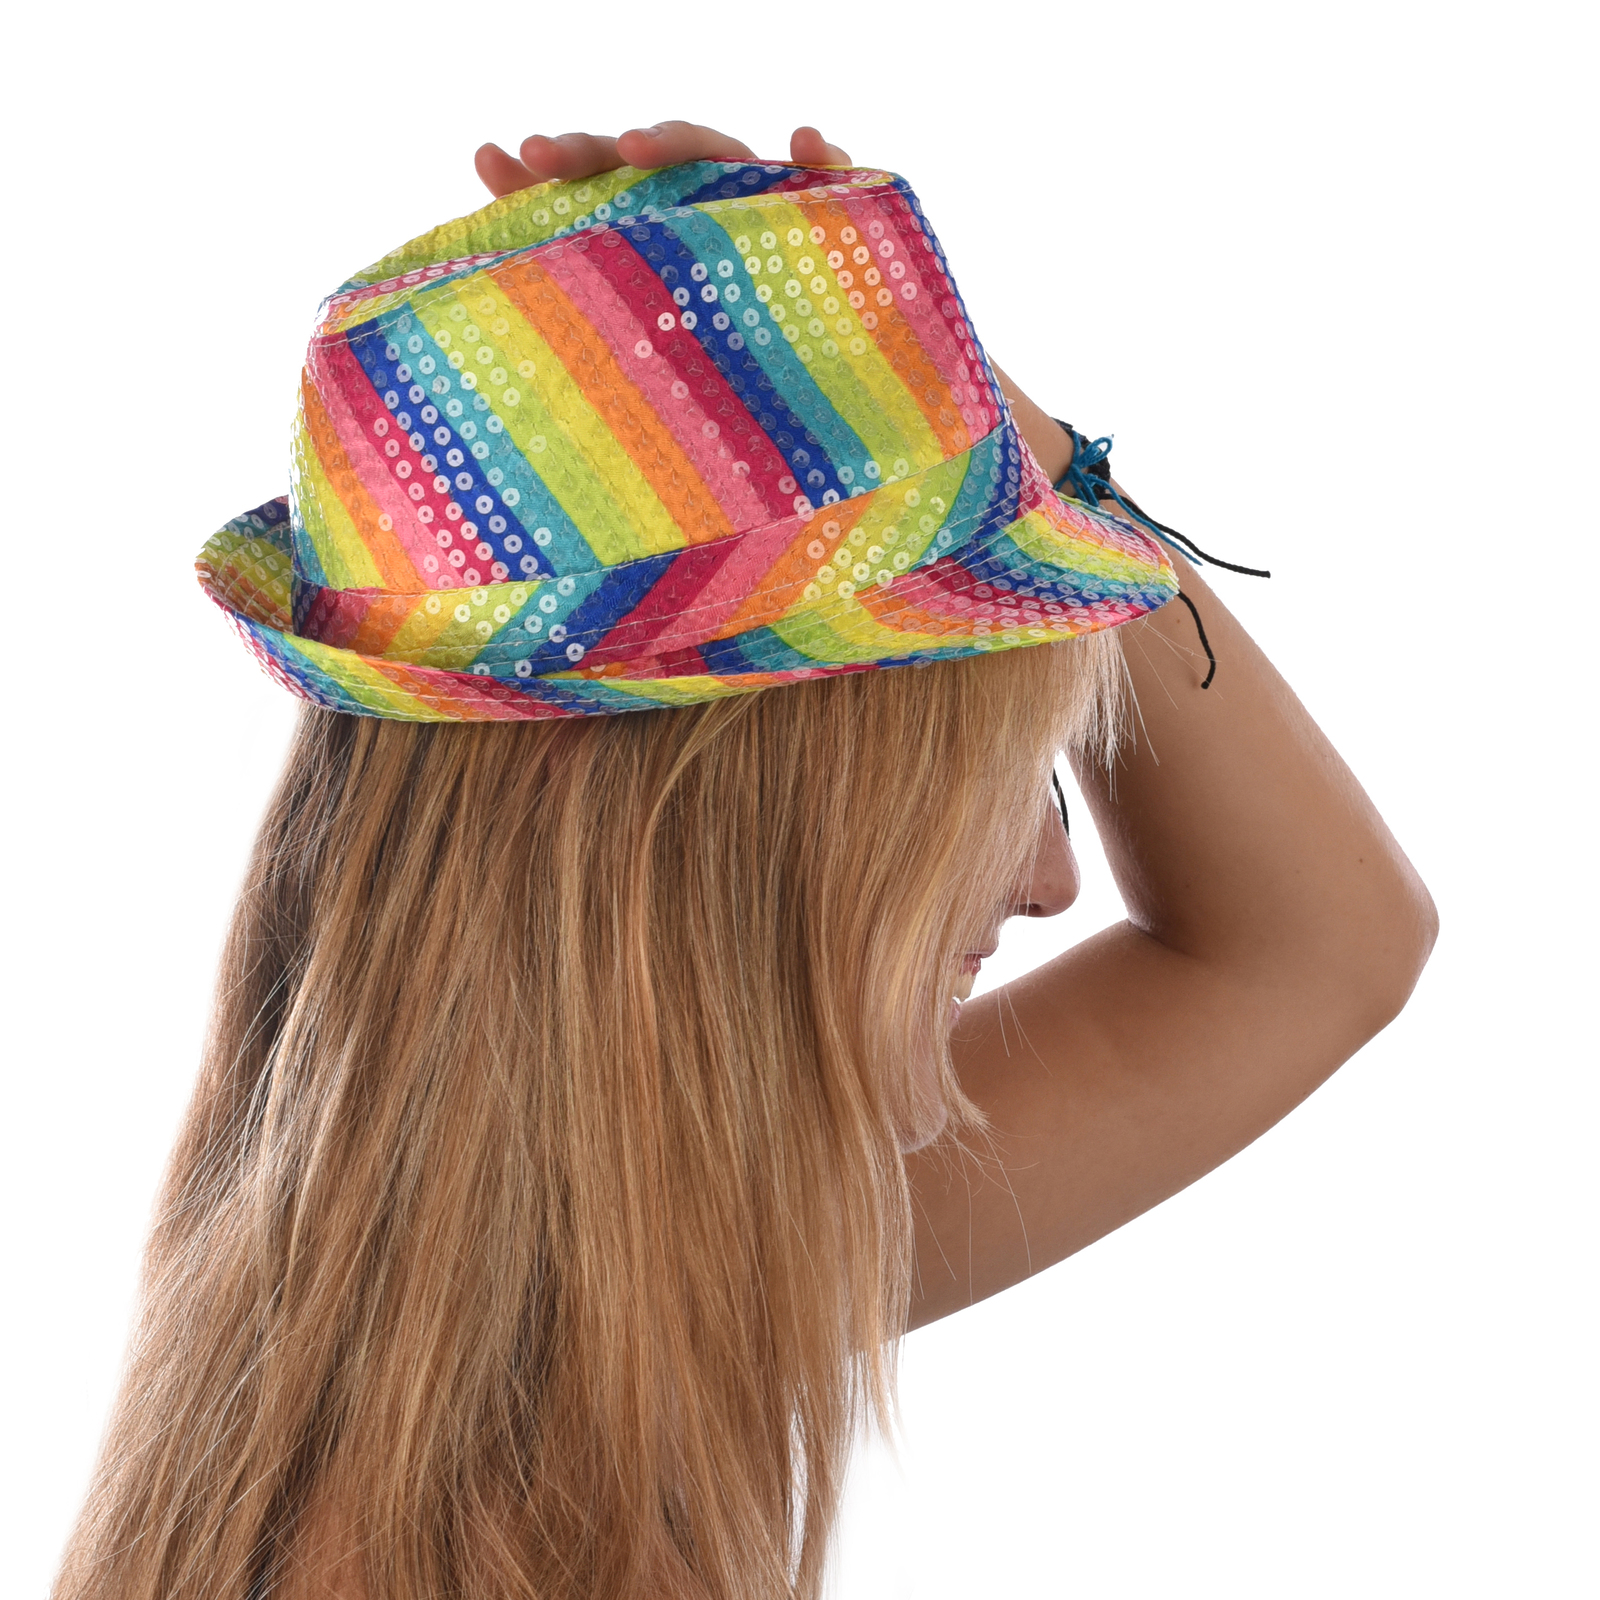 6 or 12 Bumper Party Pack of Bright Colourful Sequin Sparkle Trilby Fedora Hats 